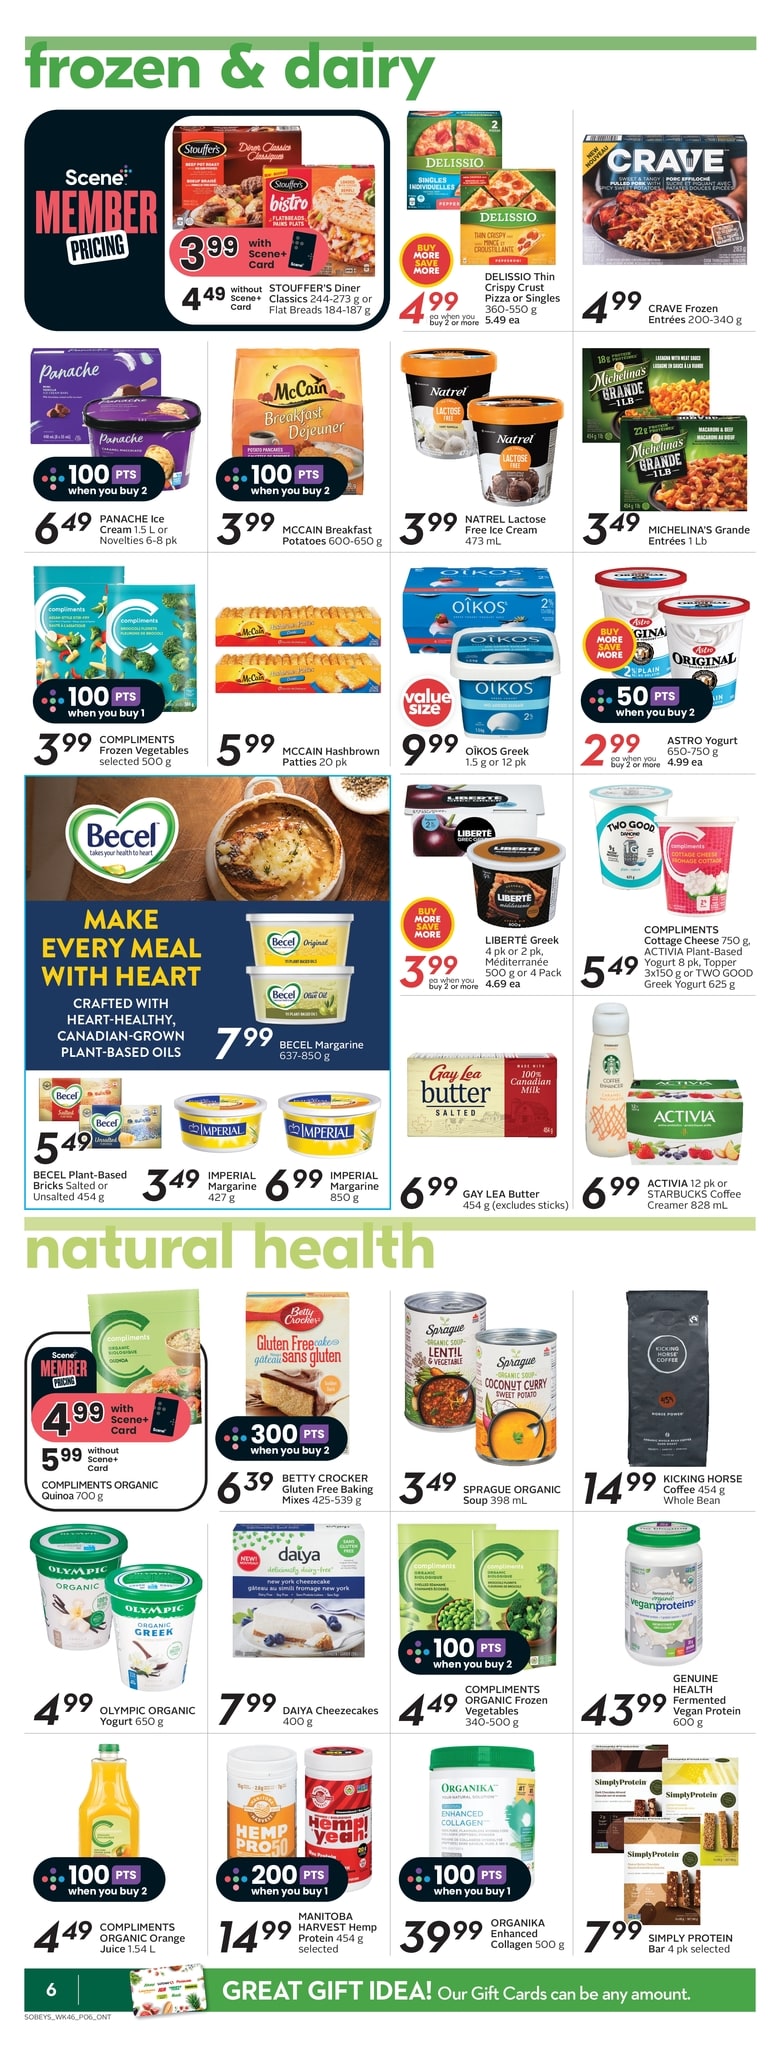 Sobeys - Weekly Flyer Specials - Page 12